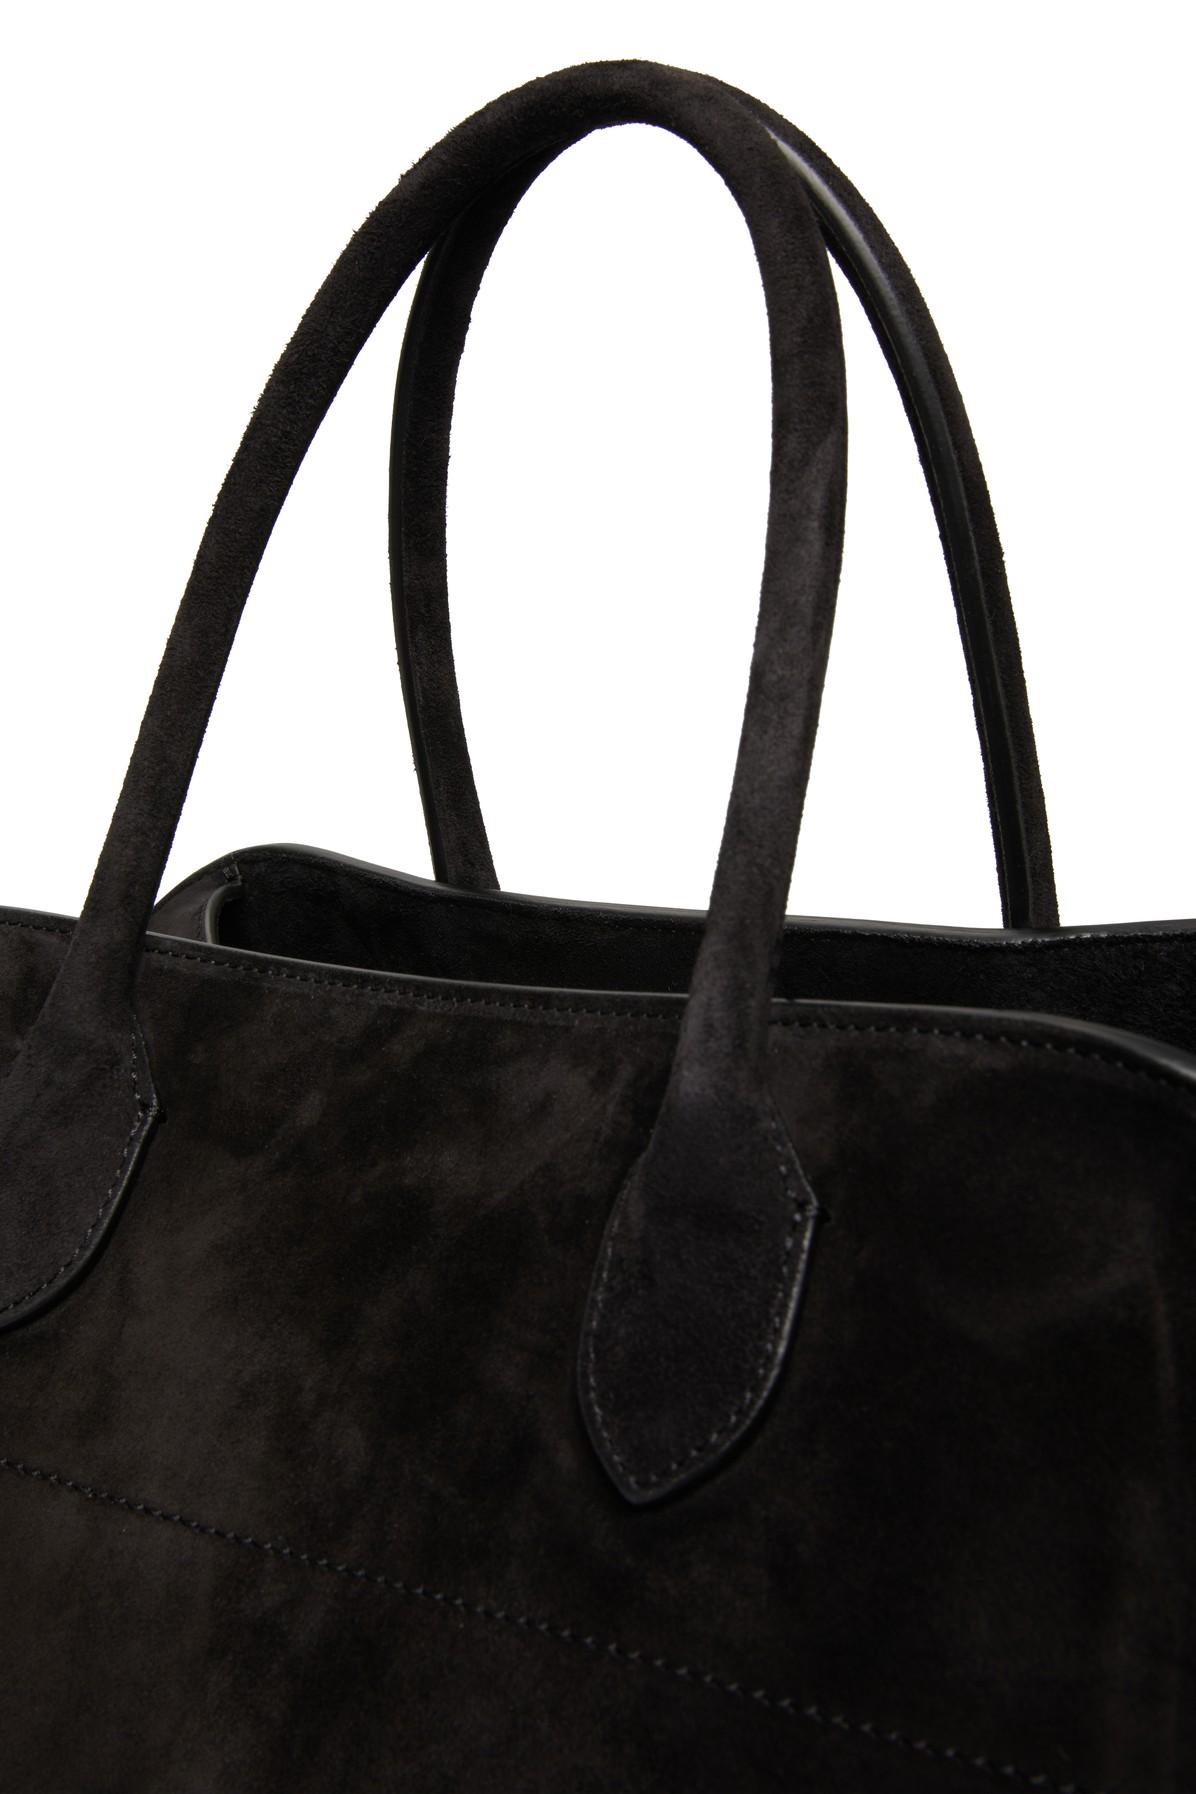 AUTHENTIC THE ROW Soft Margaux 15 Tote Bag Black Leather 0007